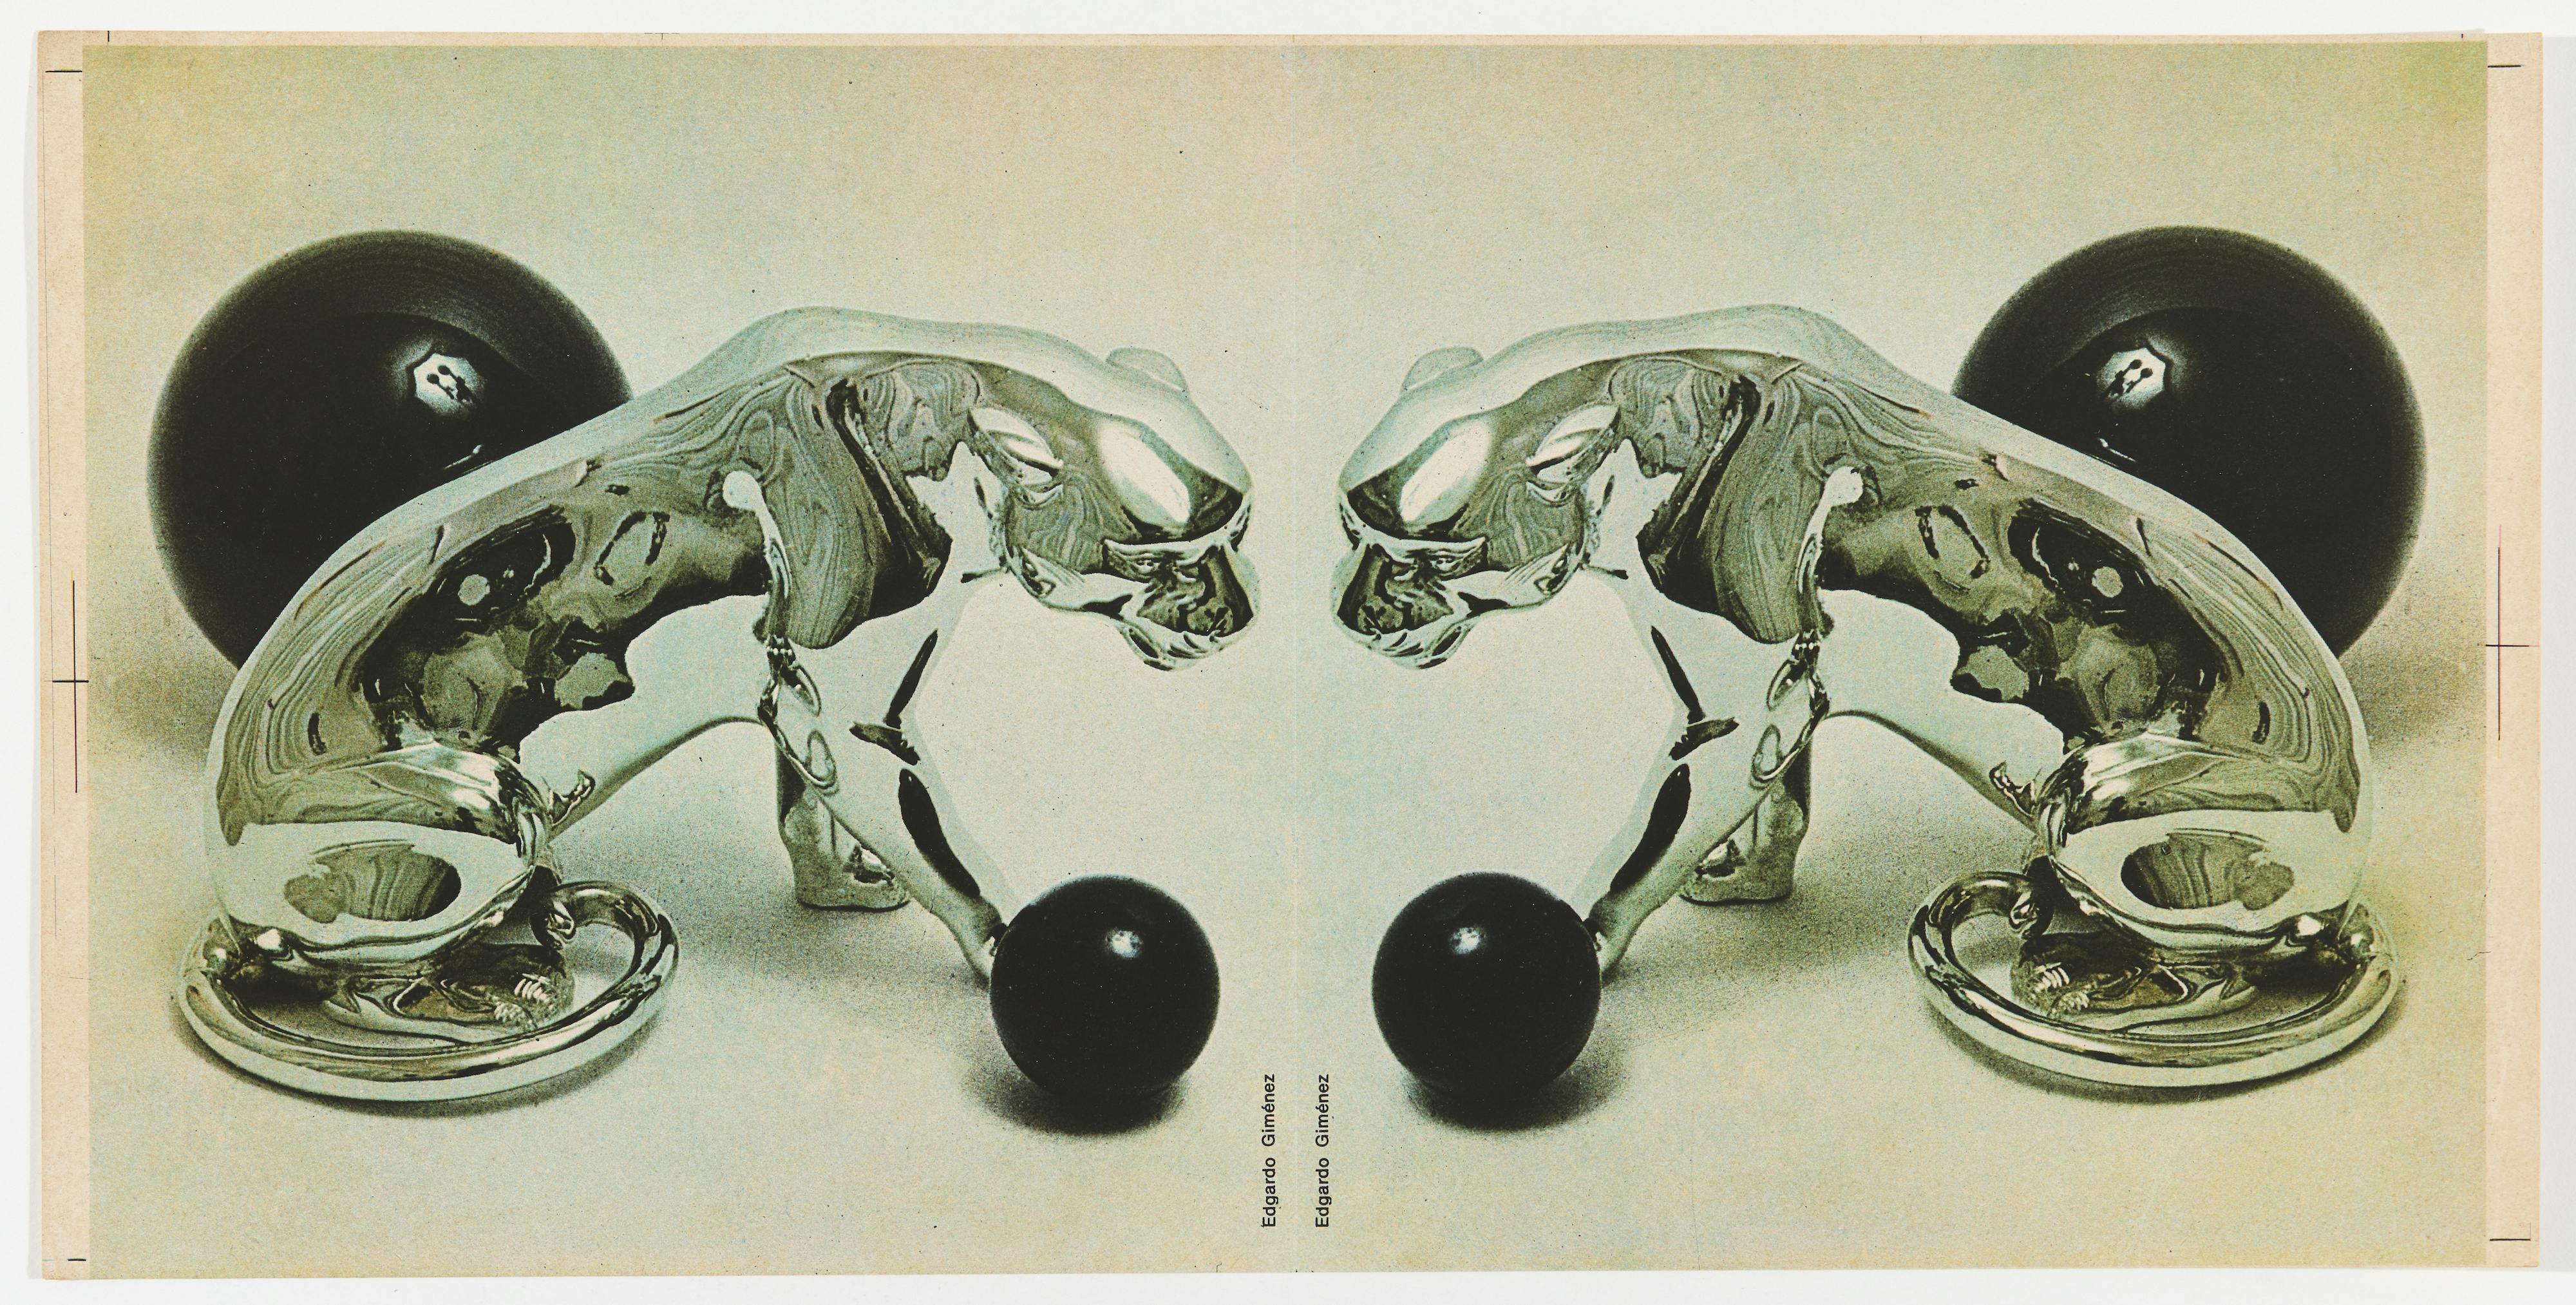 In this horizontal print, a still-life photograph is vertically mirrored, so that the objects within appear in full on both the left and right. In each image, a small and reflective black orb has been placed near the front paw of a chrome-plated statue of a panther, which sits in a crouching position with its tail wrapped around it. Behind the panther, a larger black orb appears over its back. The orb reflects a studio lighting apparatus. In the lower center of the print, displayed twice—once on either side of the line of reflection but notably not mirrored—the words "Edgardo Giménez" appear in small black type.